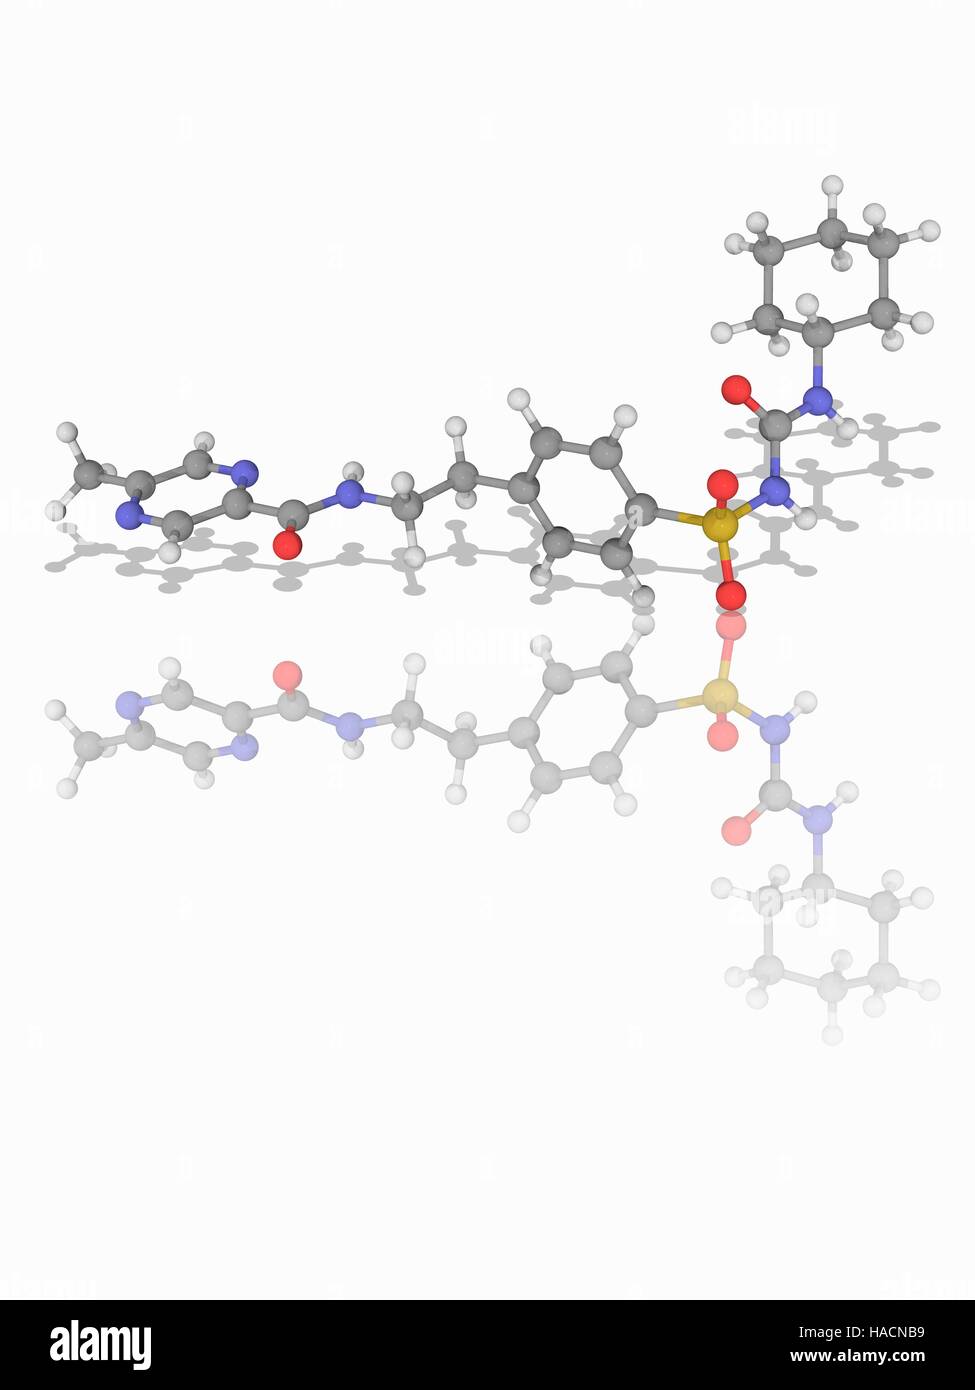 Glipizide. Molecular model of the anti-diabetic drug glipizide (C21.H27.N5.O4.S). This is a sulphonylurea drug that acts by increasing insulin release from the beta cells in the pancreas. Atoms are represented as spheres and are colour-coded: carbon (grey), hydrogen (white), nitrogen (blue), oxygen (red) and sulphur (yellow). Illustration. Stock Photo